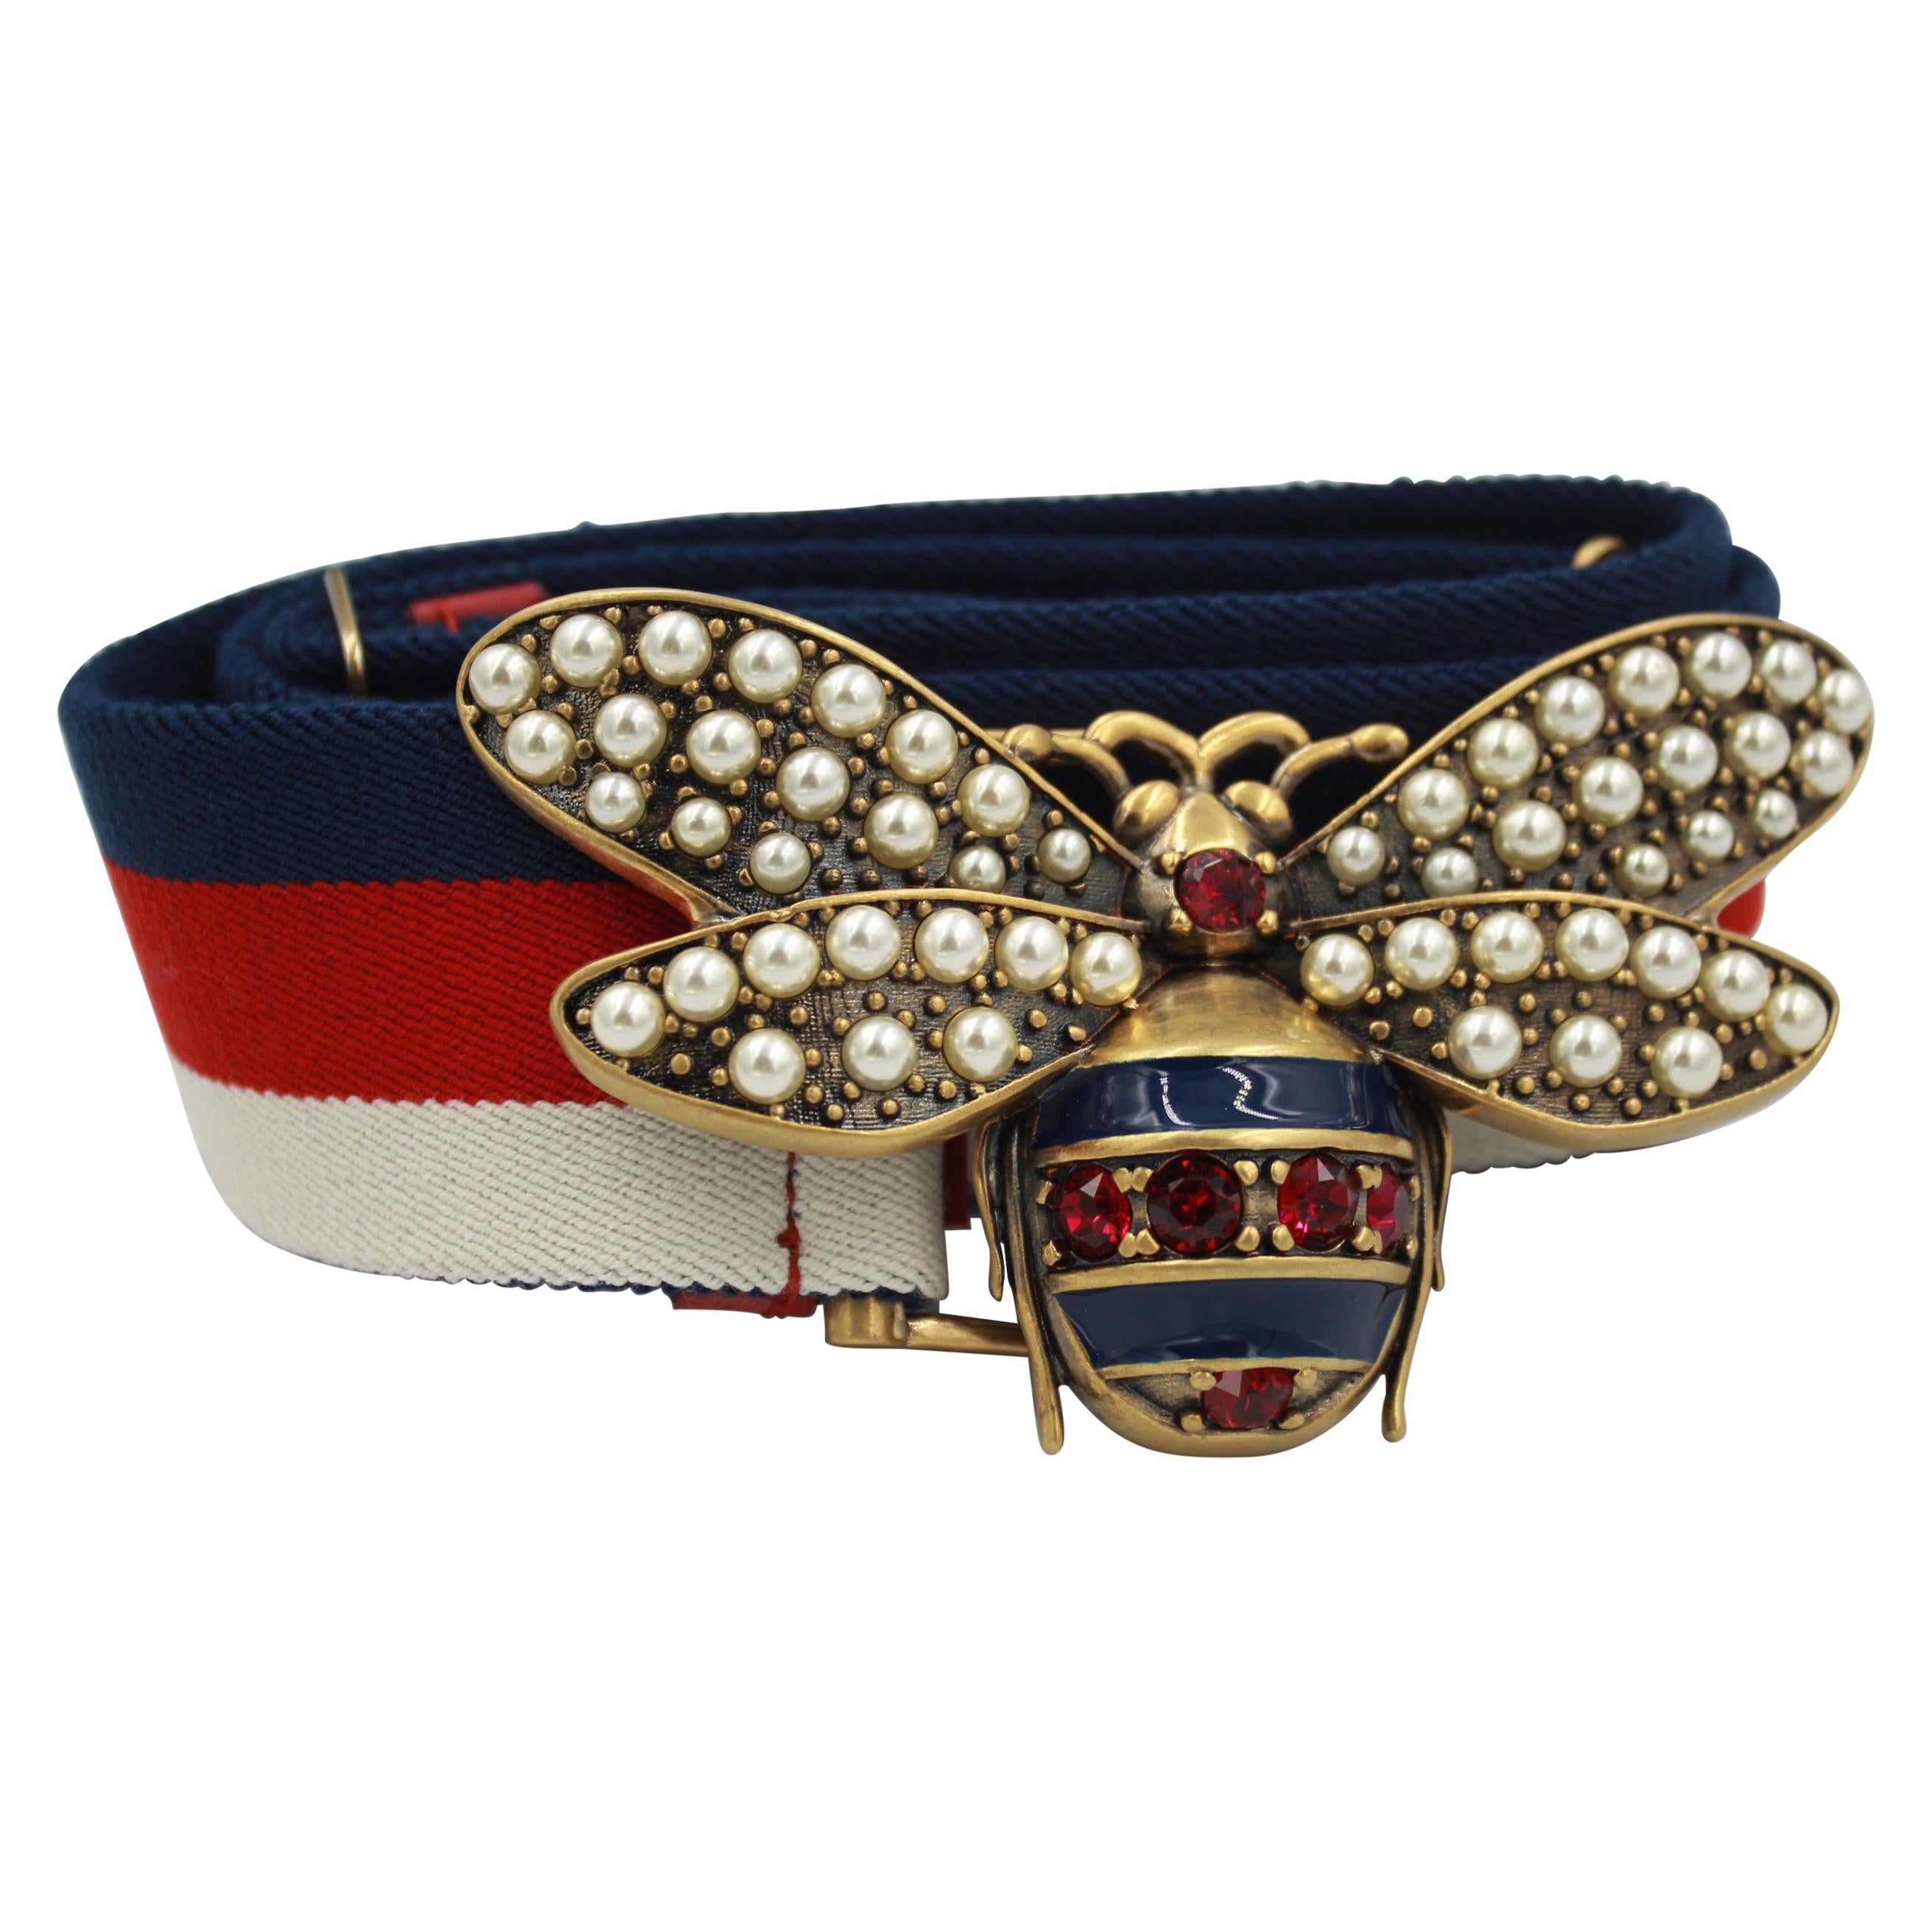 Gucci canvas Belt with the bee buckle made of stone and fake pearls.
Gold metal finishes.
In white, red and blue canvas.
Adjusatble.
Very good condition.